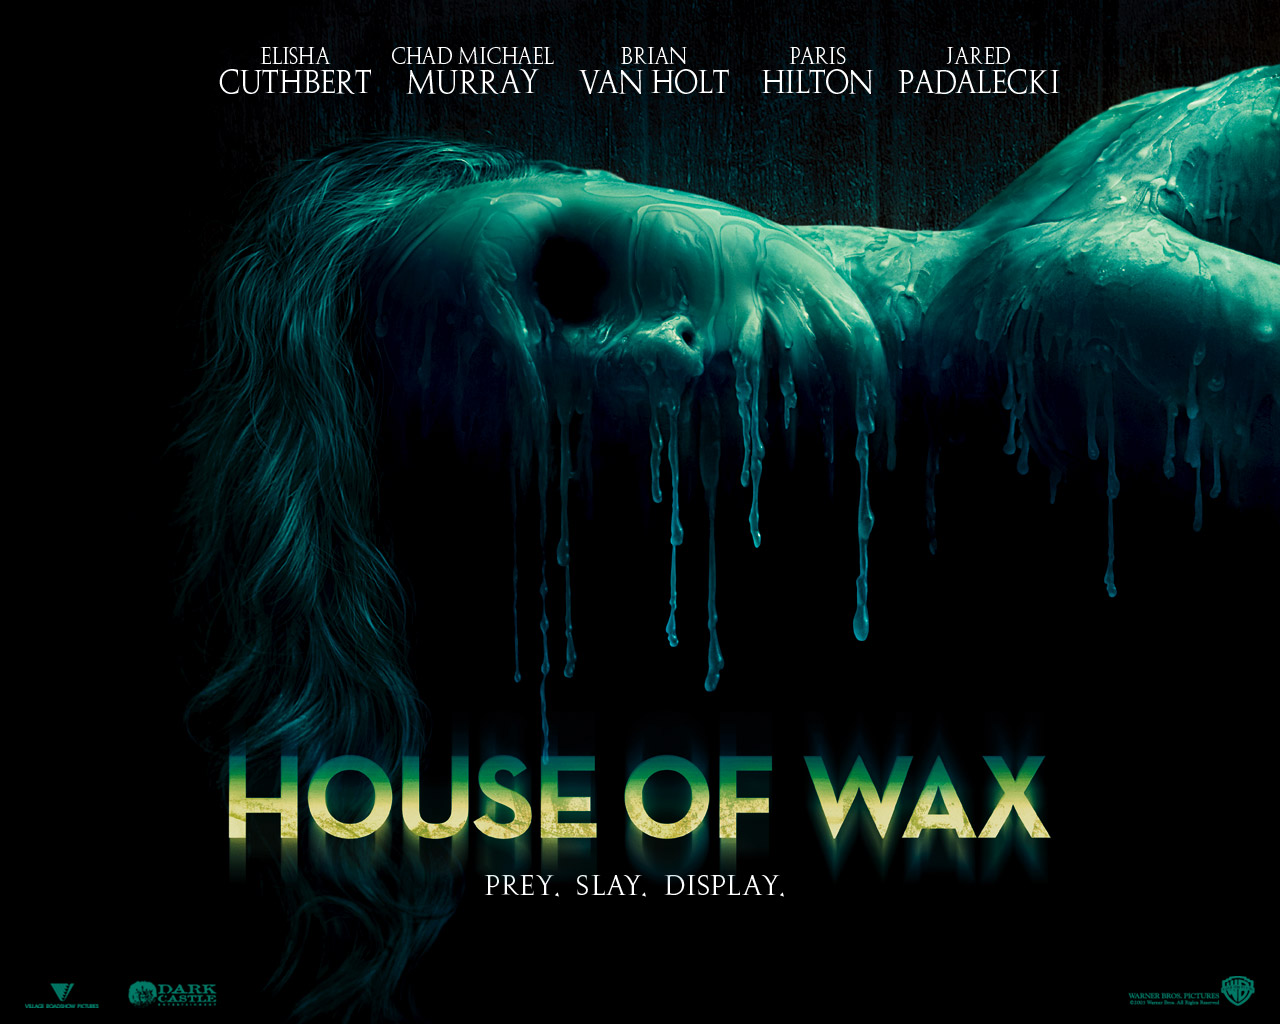 Download HQ House Of Wax wallpaper / Movies / 1280x1024